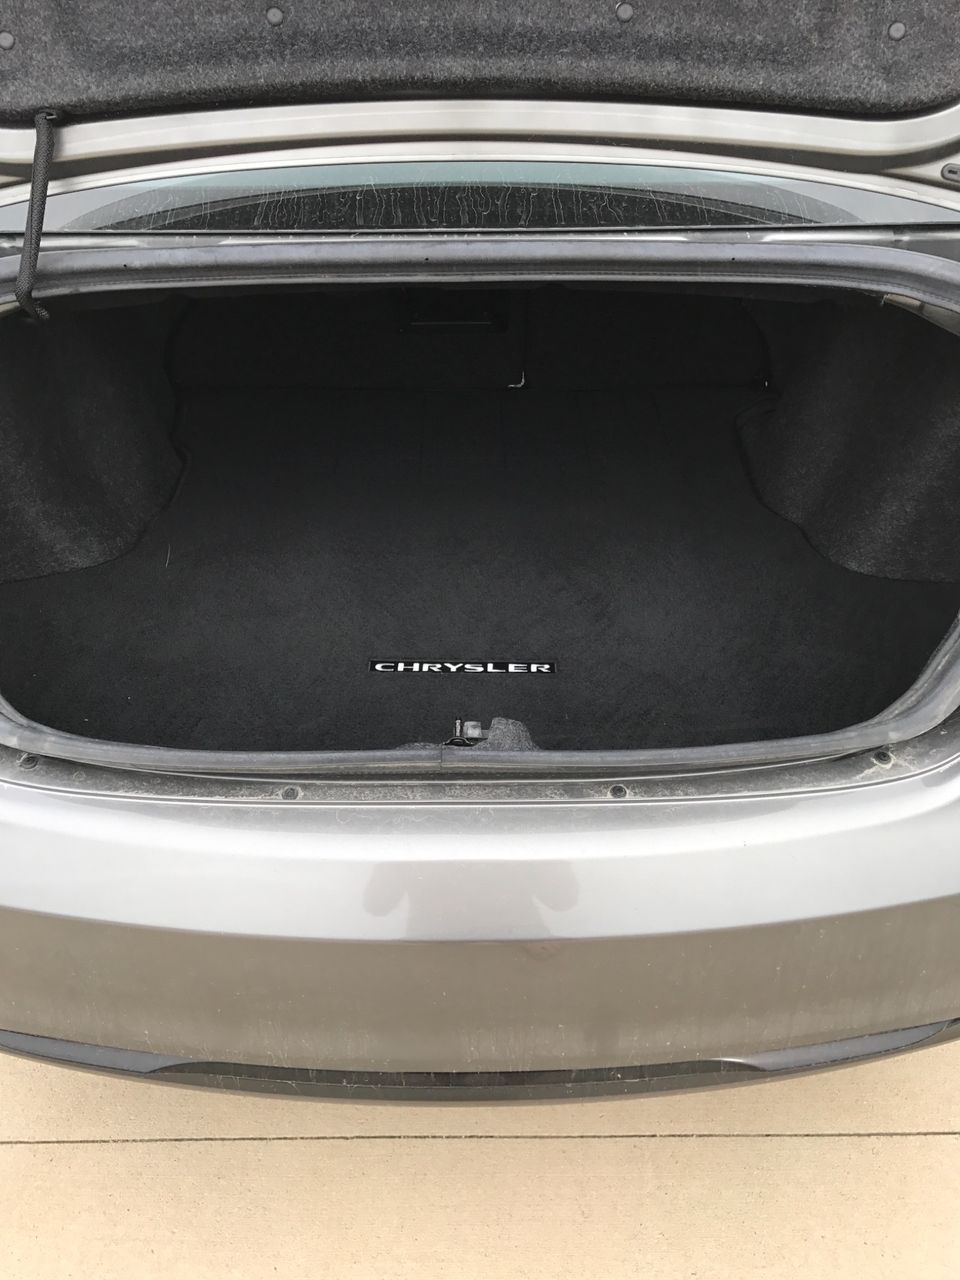 2013 Chrysler 200 Limited | Marion, IA, Tungsten Metallic Clear Coat (Gray), Front Wheel